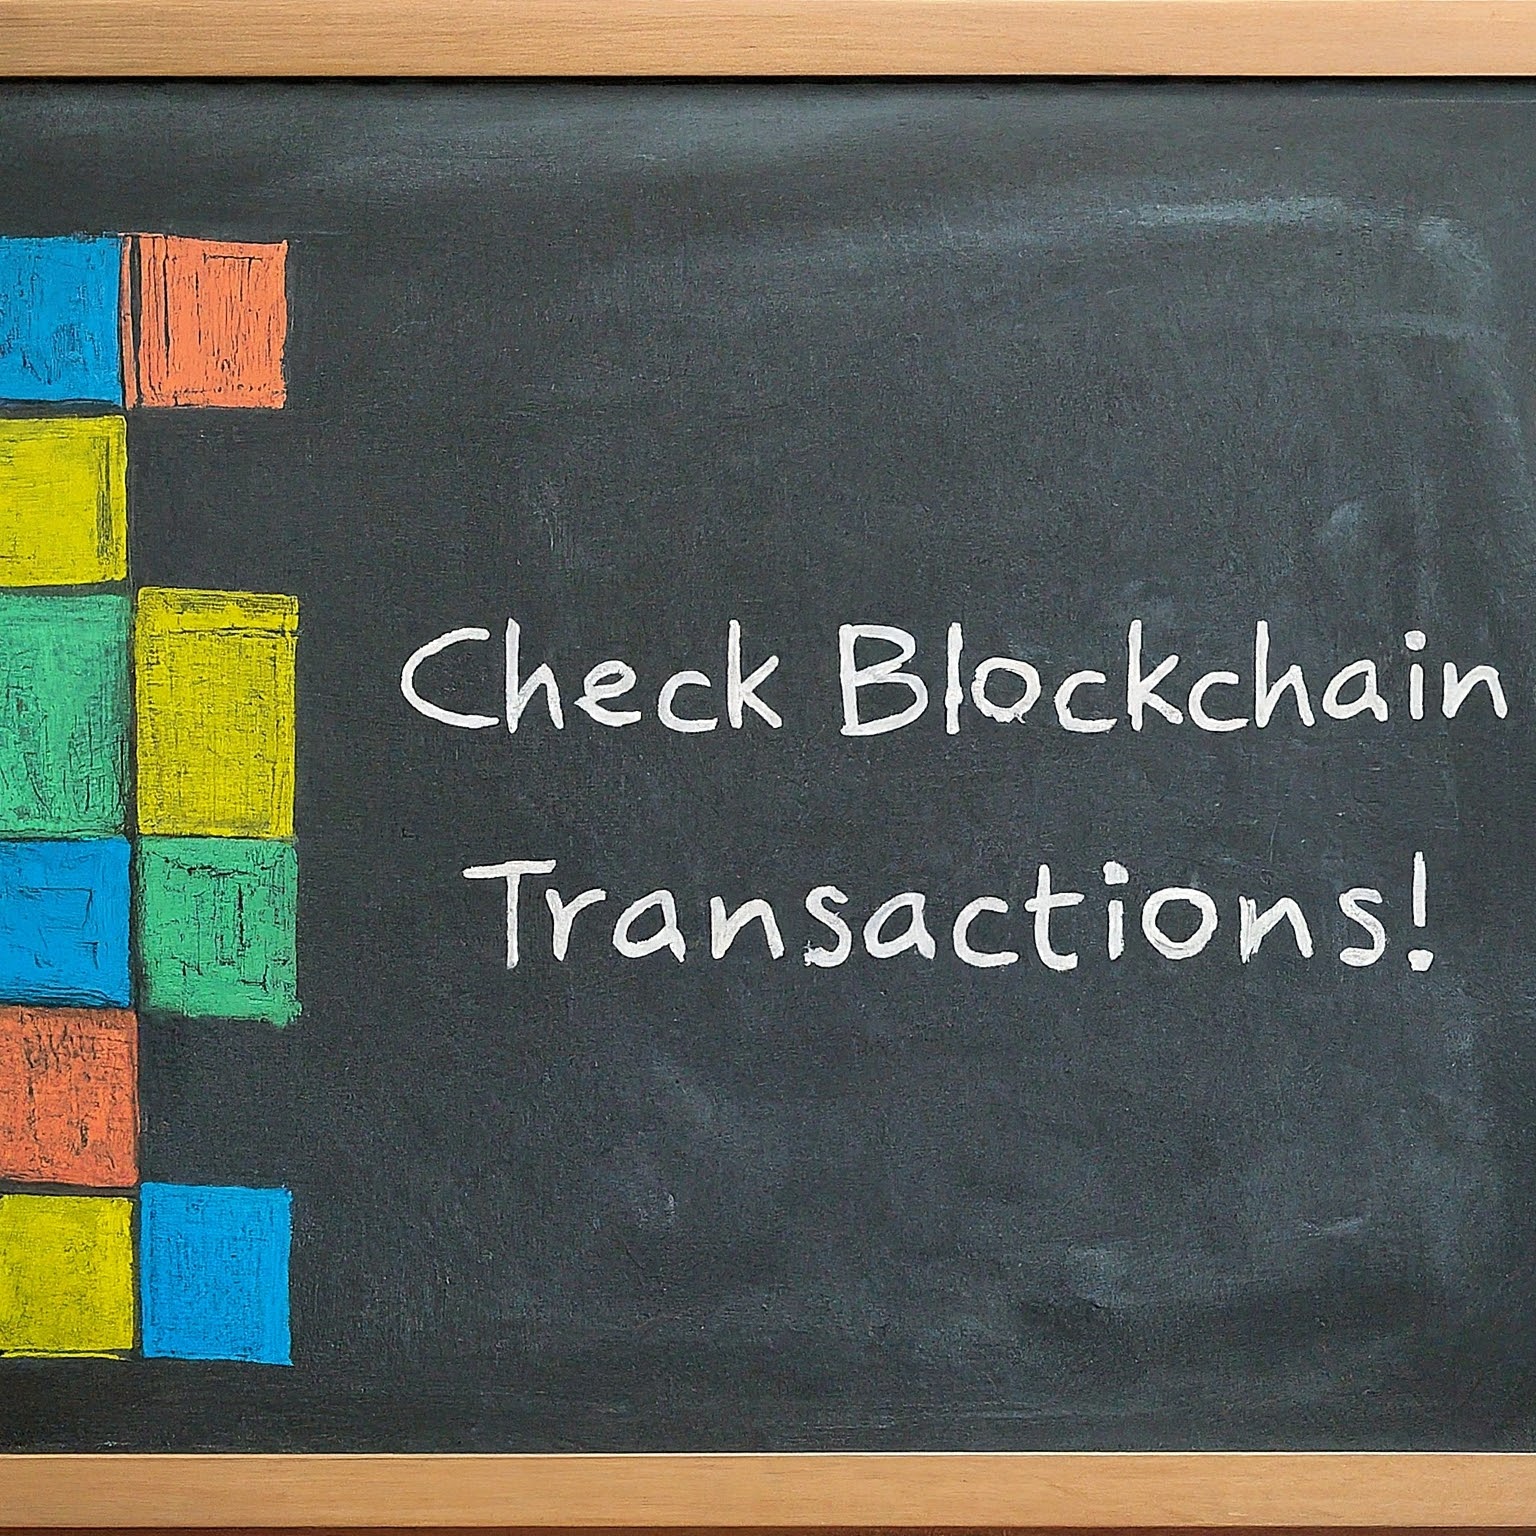 How to Check Blockchain Transactions